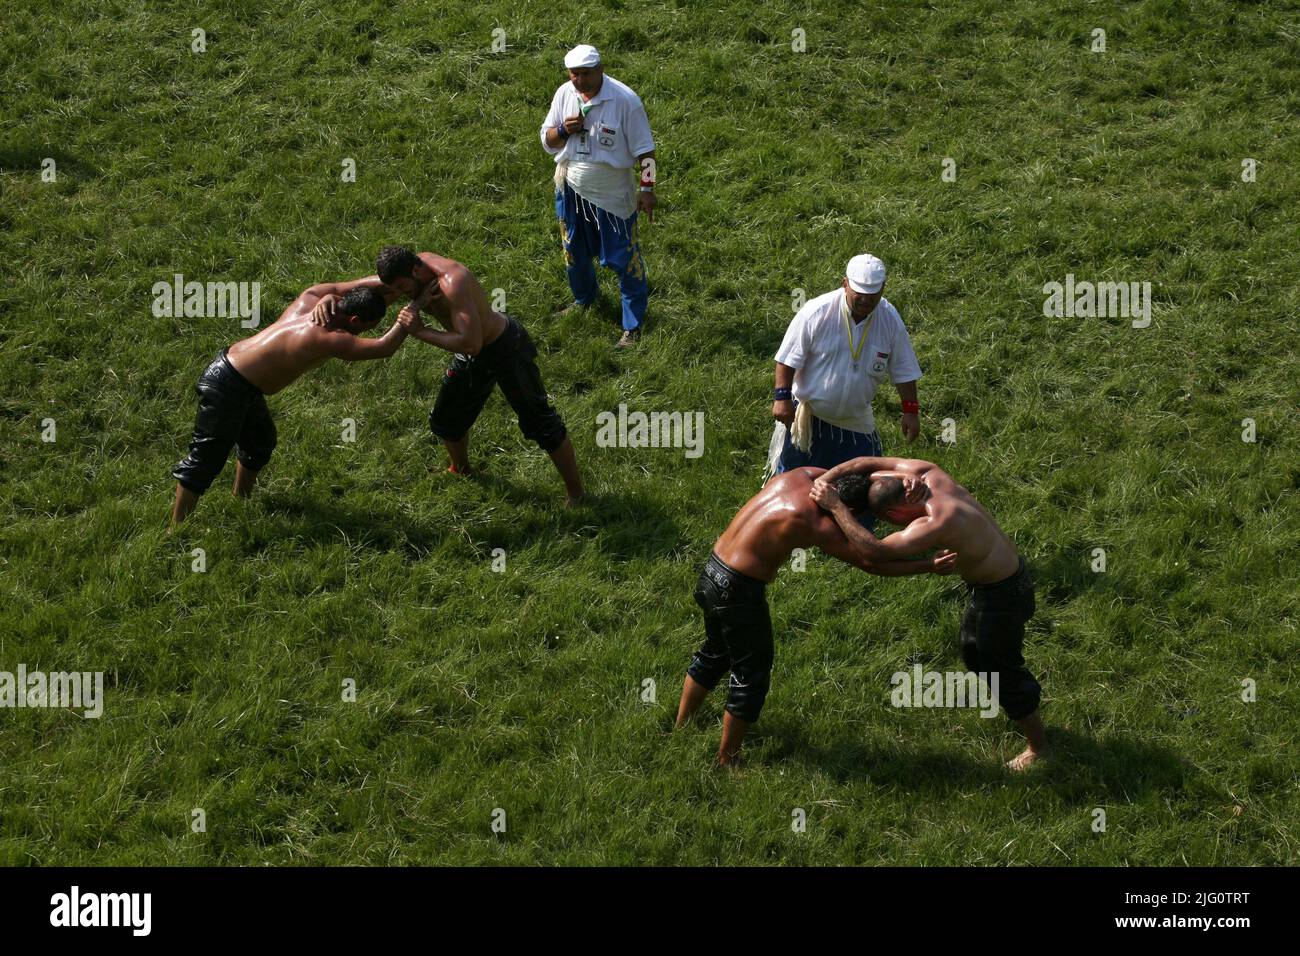 Kırkpınar (Turkish Oil Wrestling). Referees keep a close eye as wrestlers fight during the 648th Kırkpınar Tournament in Edirne, Turkey, on 4 July 2009. Kırkpınar wrestlers compete stripped to the waist and smeared their bodies with olive oil. Wrestlers dressed only black leather trousers called kisbet. The name of the wrestler is embossed by metal rivets behind. Stock Photo